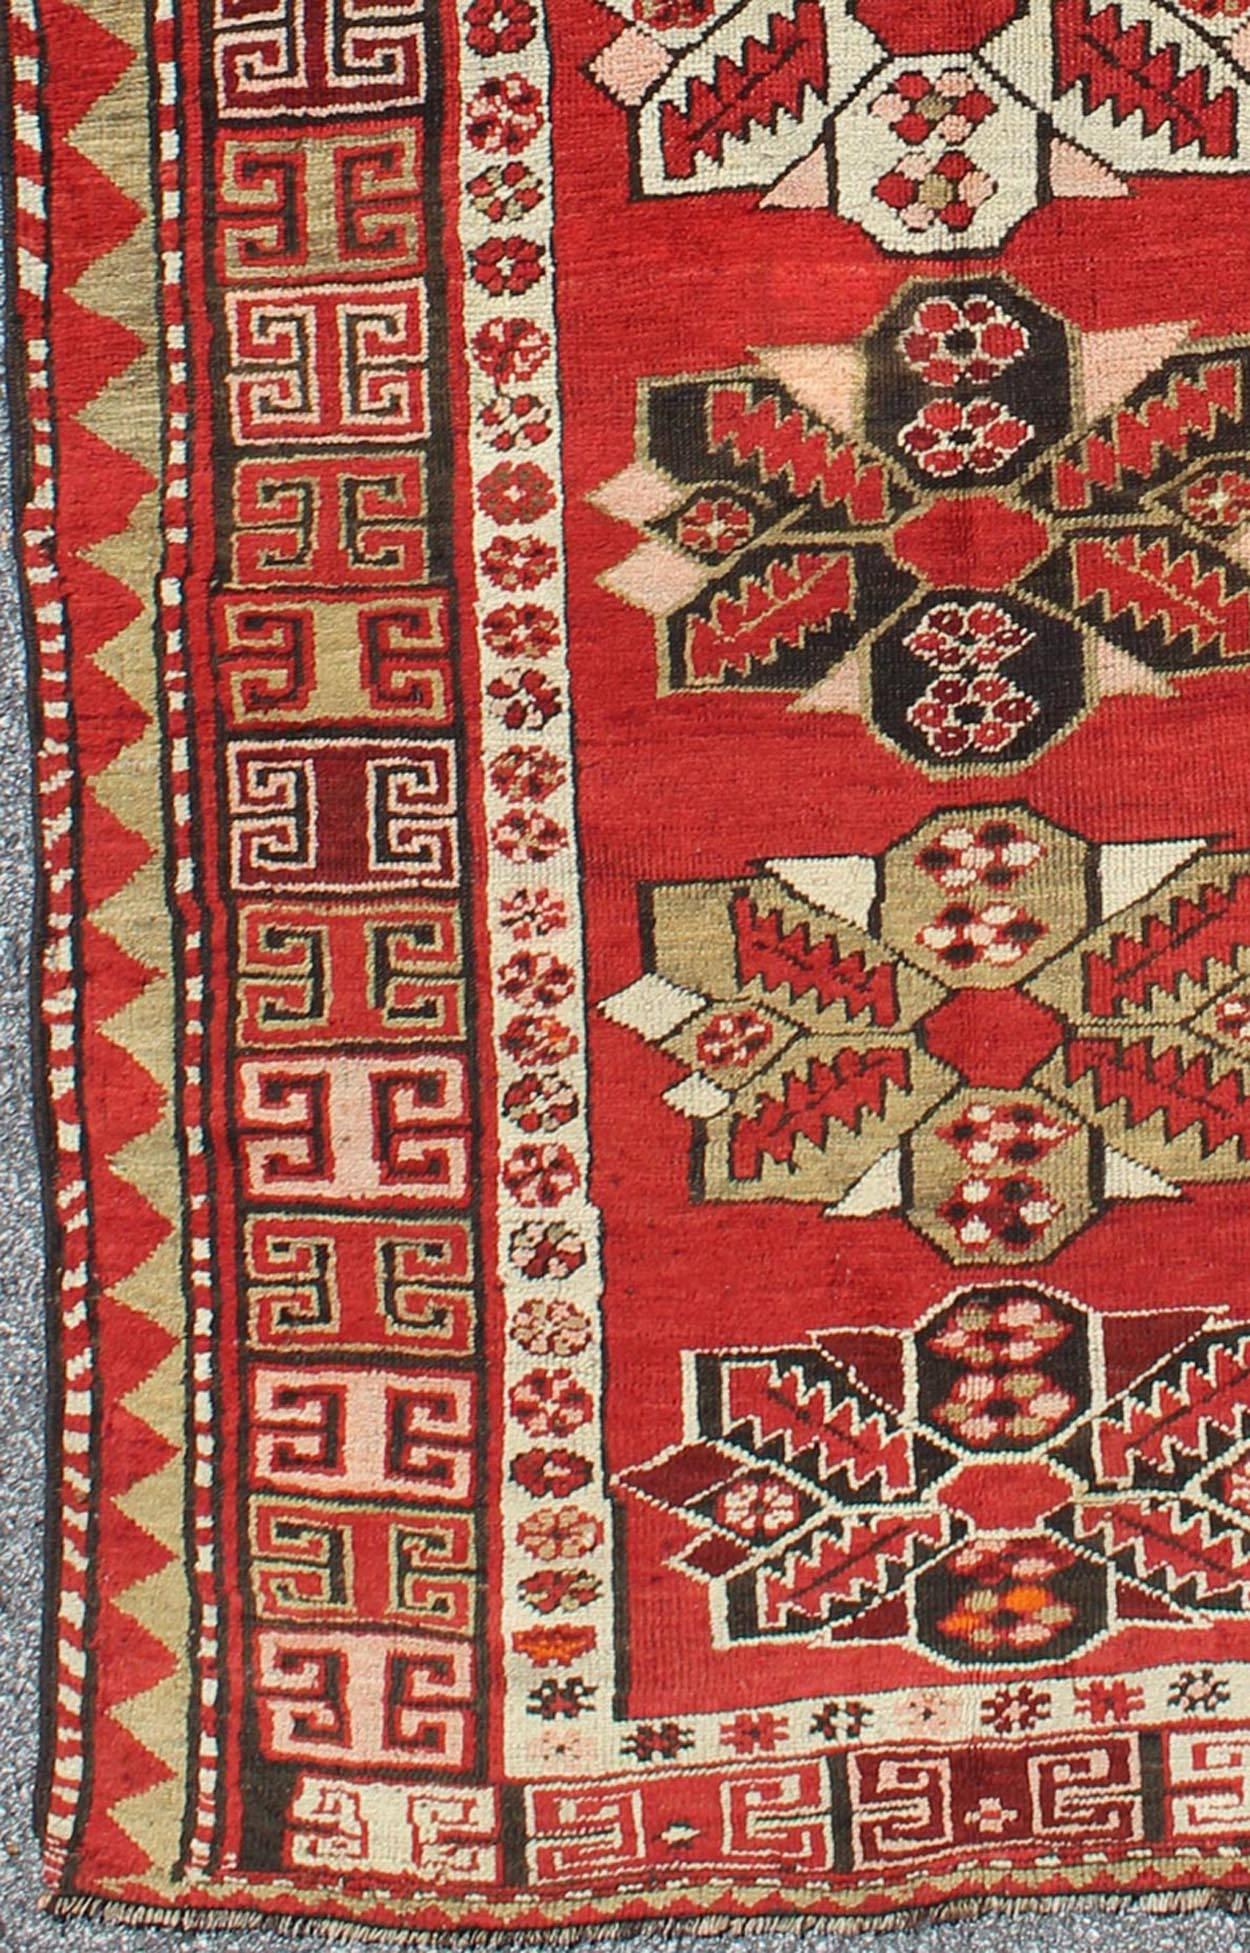 Red background antique Kazak runner with medallions and tribal design, Keivan Woven Arts / rug g-1204, country of origin / type: Caucasus / Kazak, circa 1900

The field design of this antique Kazak runner features medallions of differing colors